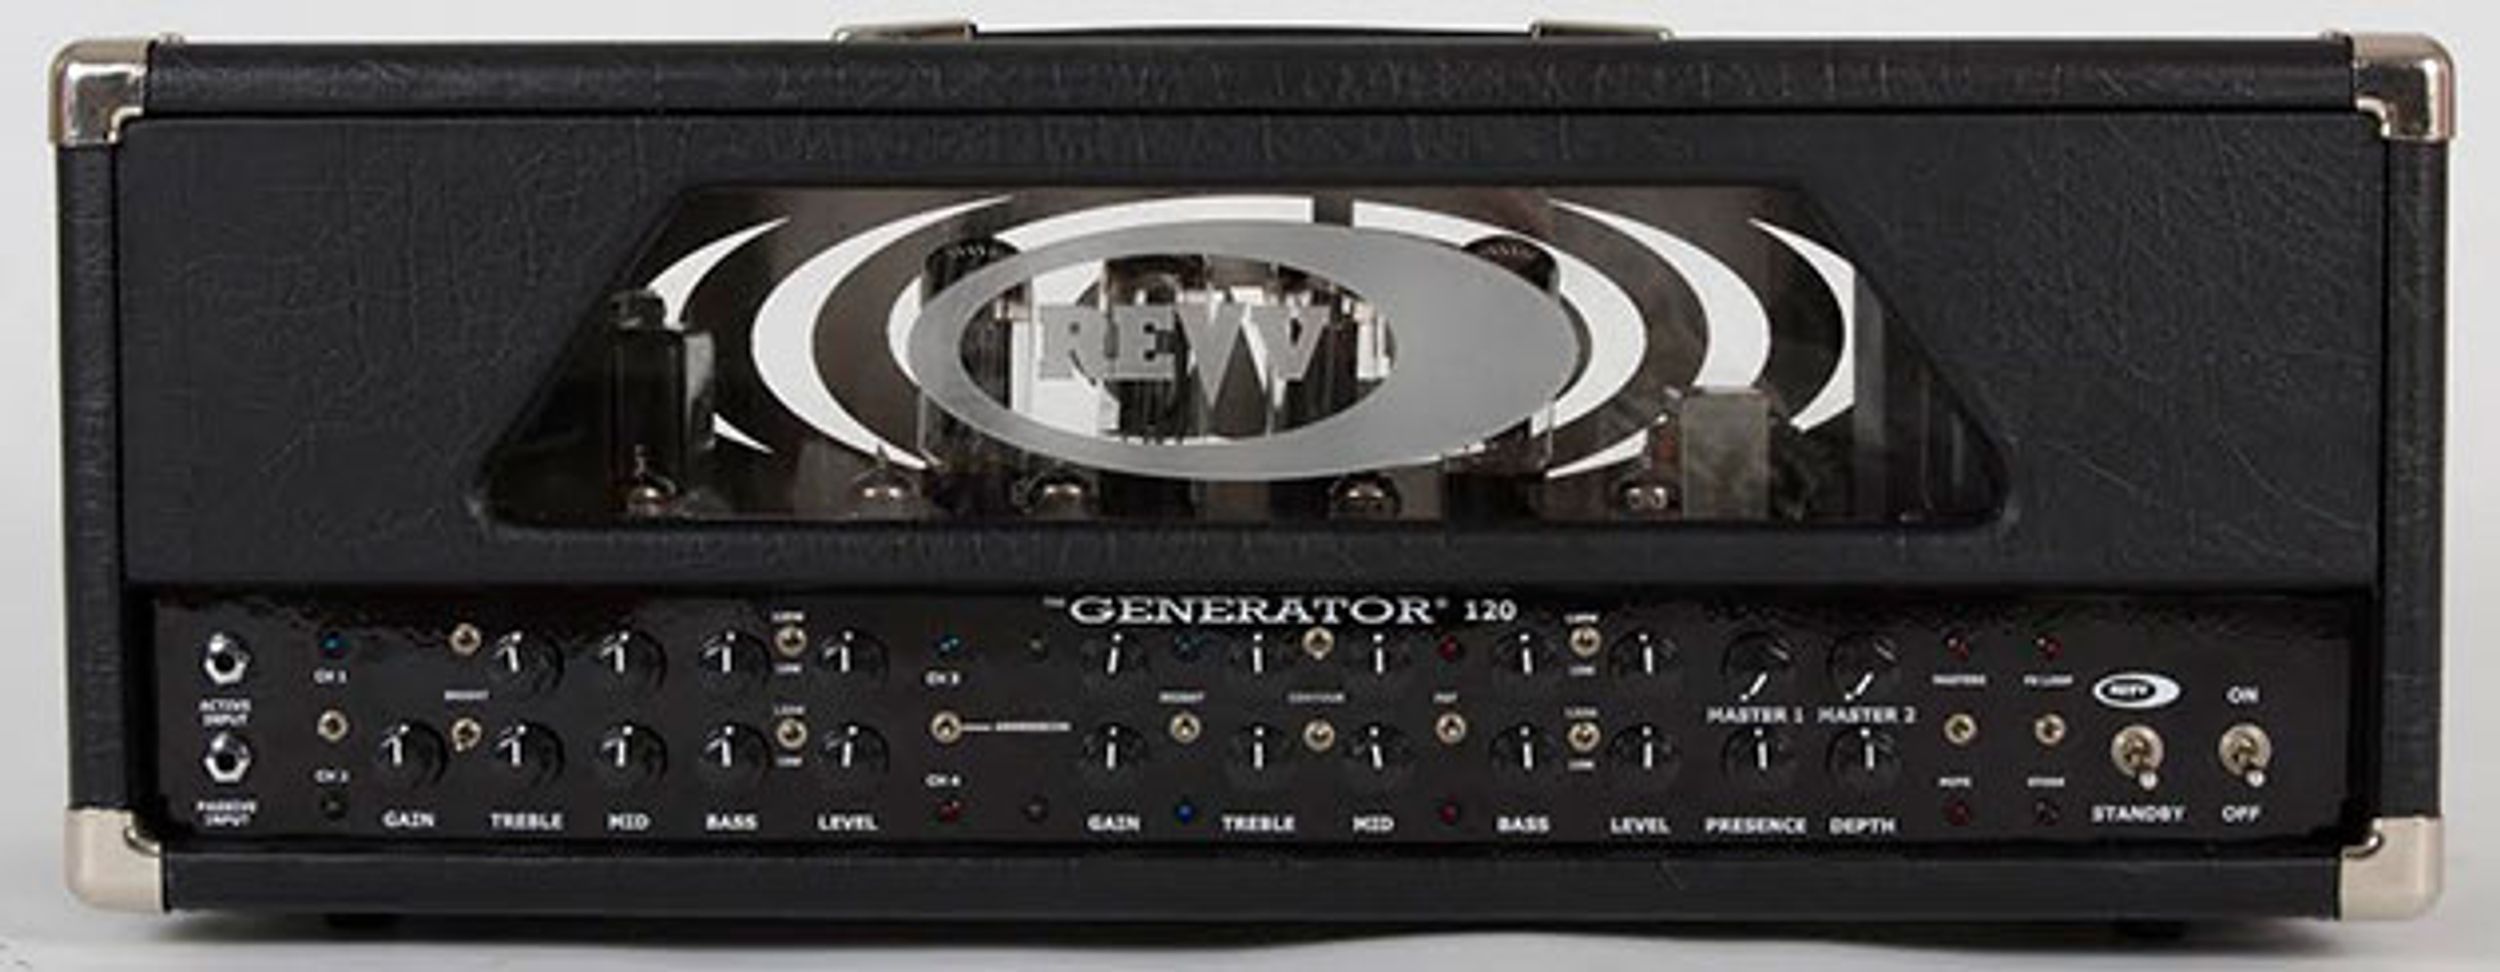 Revv Amplification Unveils Newly Revamped Generator 100 & 120 Heads